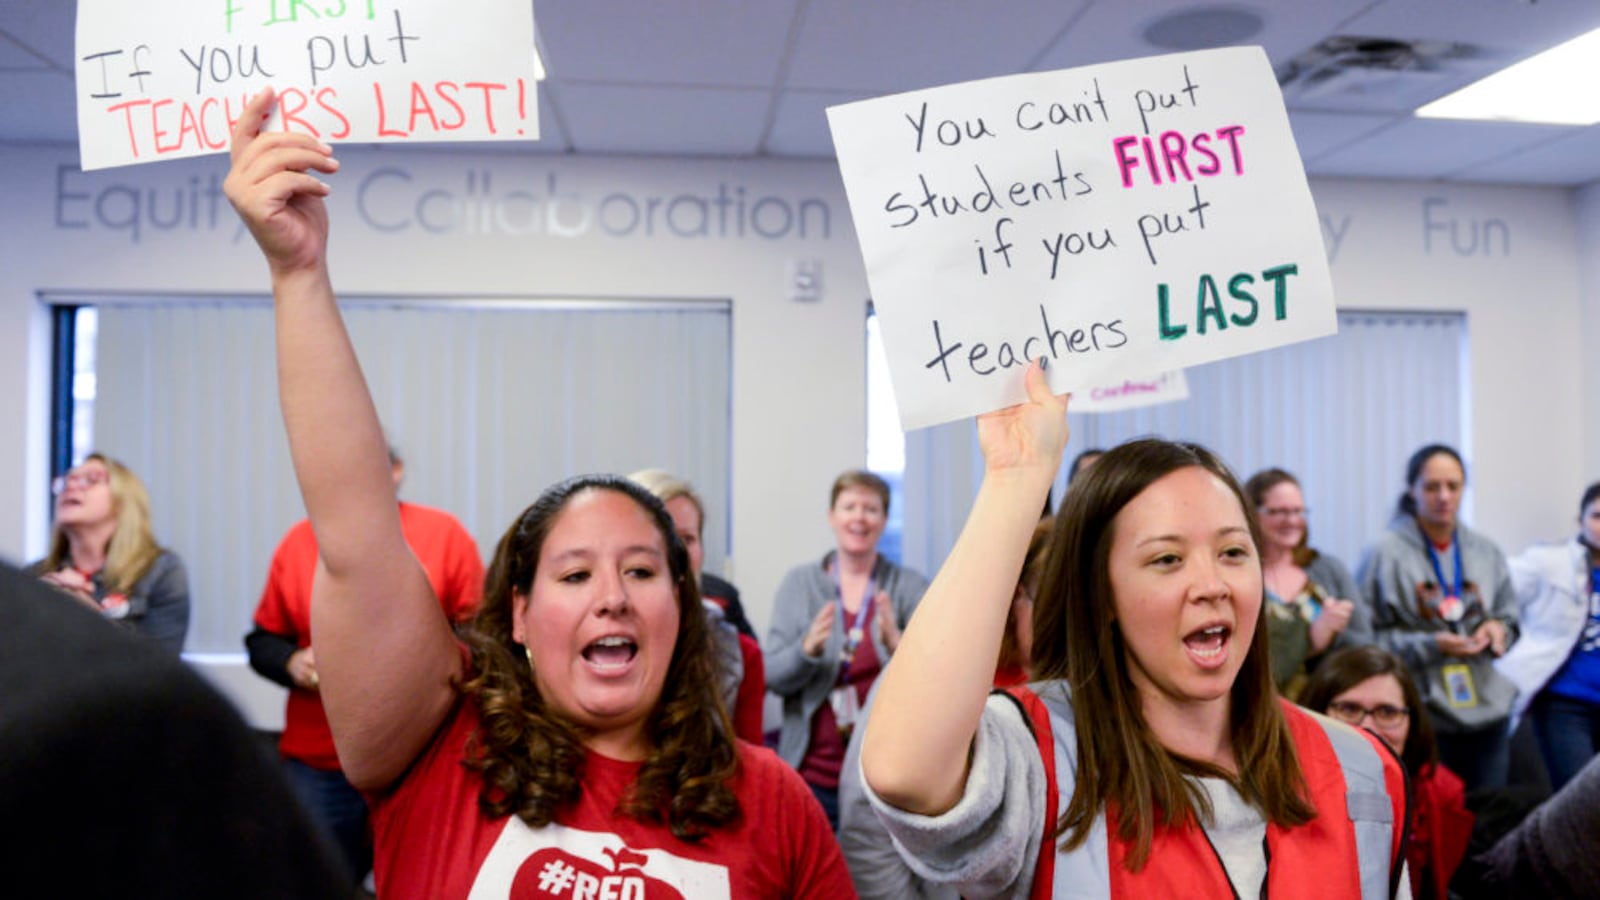 Eagleton Elementary School first grade teacher Valerie Lovato, left, and East High School French teacher Tiffany Choi hold up signs as the Denver teachers union negotiates with district officials.